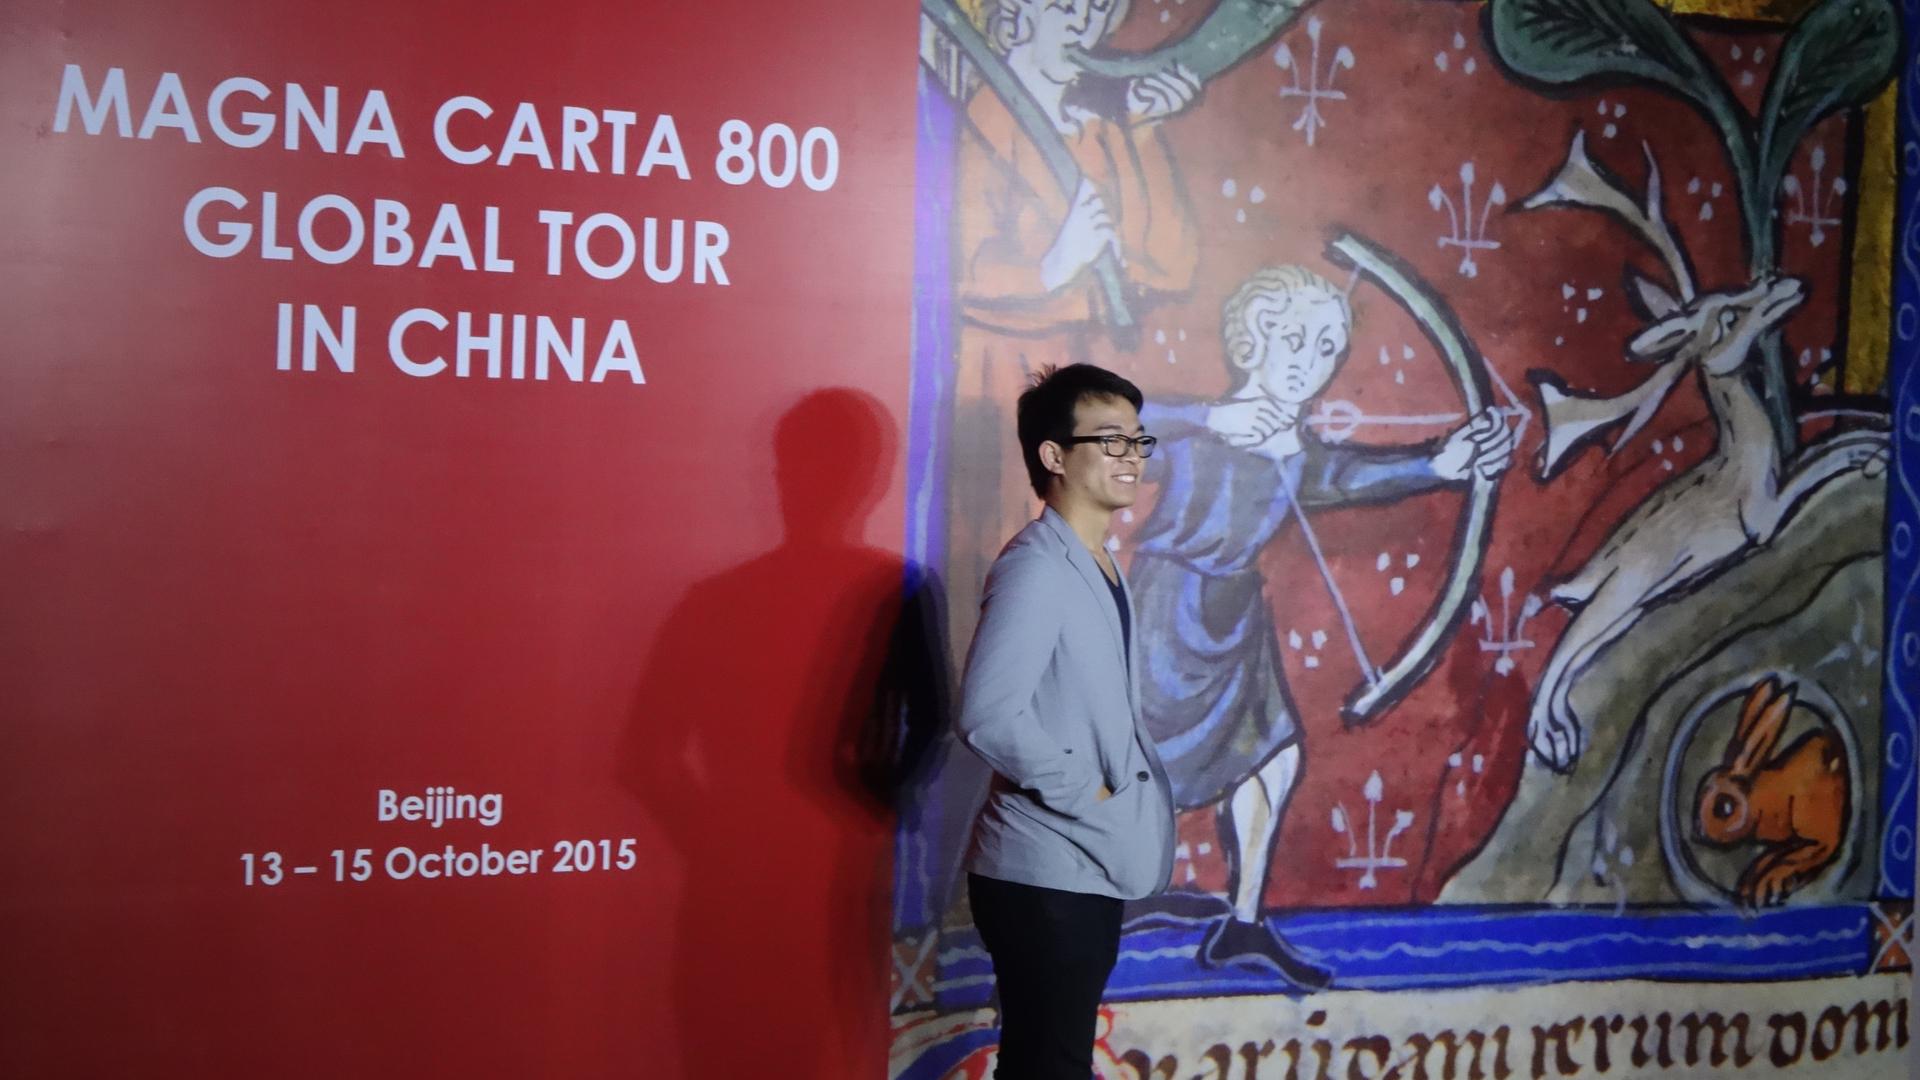 Chinese visitor poses to mark Magna Carta's first visit to China